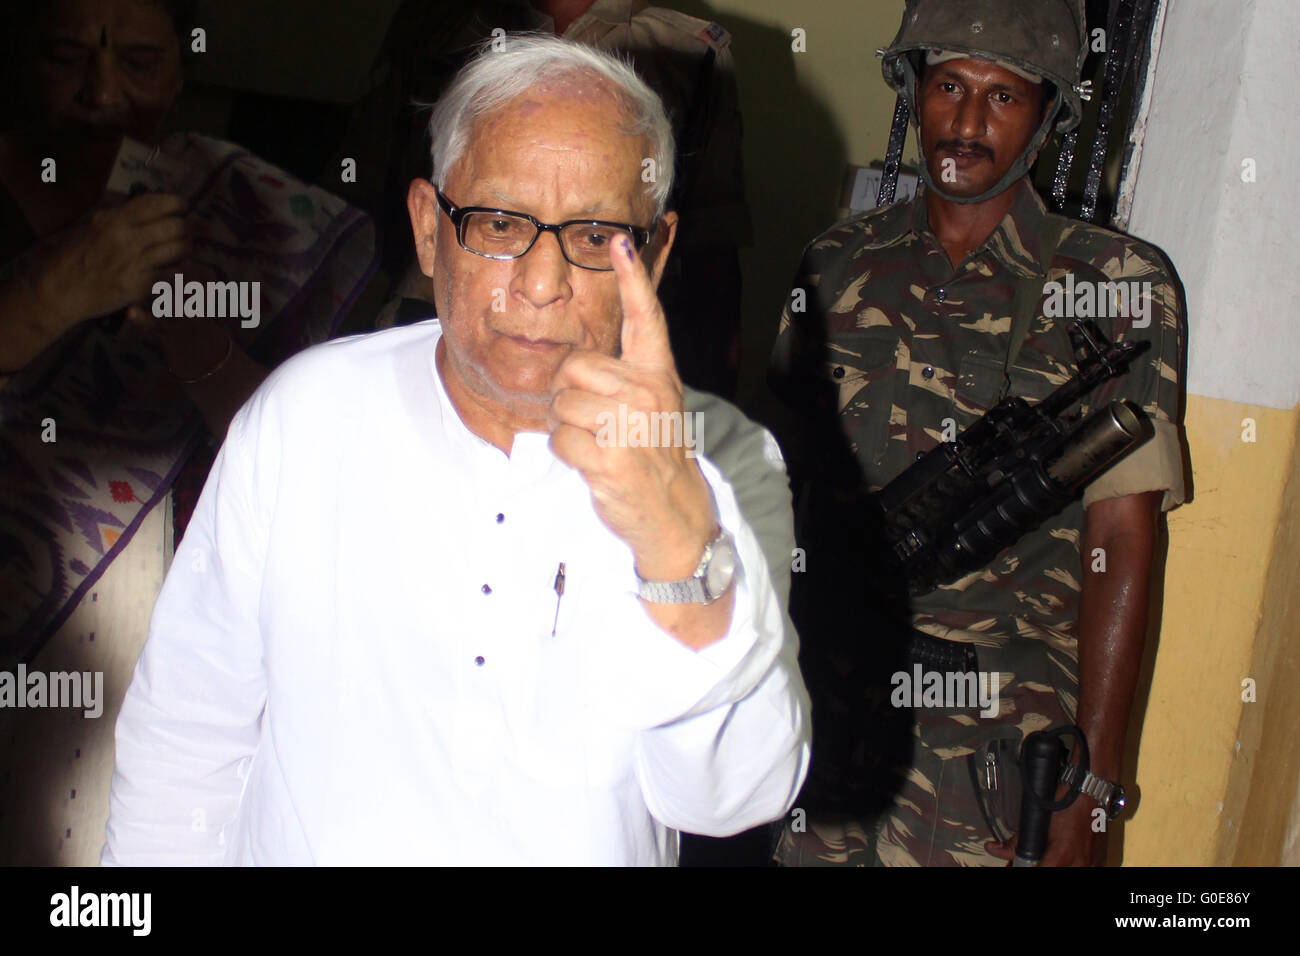 Kolkata, India. 30th Apr, 2016. EX-Cheif Minister of West Bengal Budhadeb Bhattacharya comes out after casting his vote showing ink mark sign at Patha Bhavan (Jr.) school. The fifth phase of polling in West Bengal took place on Saturday across 53 constituencies spread pver three district. Poling take place in tight security and 90,000 central and state police forces was deployed and 144 CrPC was in force in all polling constituencies. © Saikat Paul/Pacific Press/Alamy Live News Stock Photo